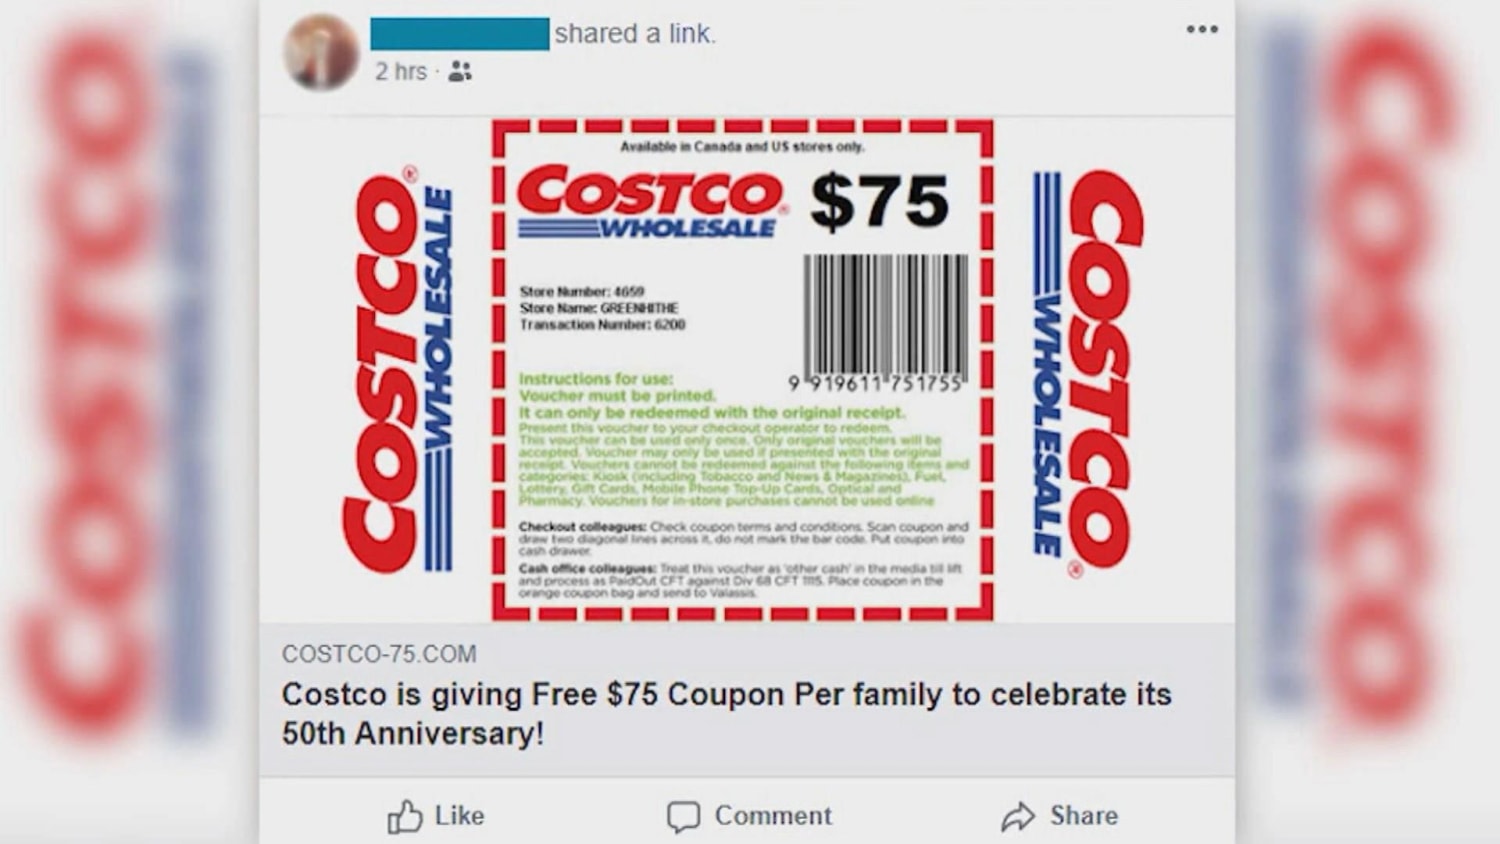 Kohl's Thanksgiving Coupon Scam